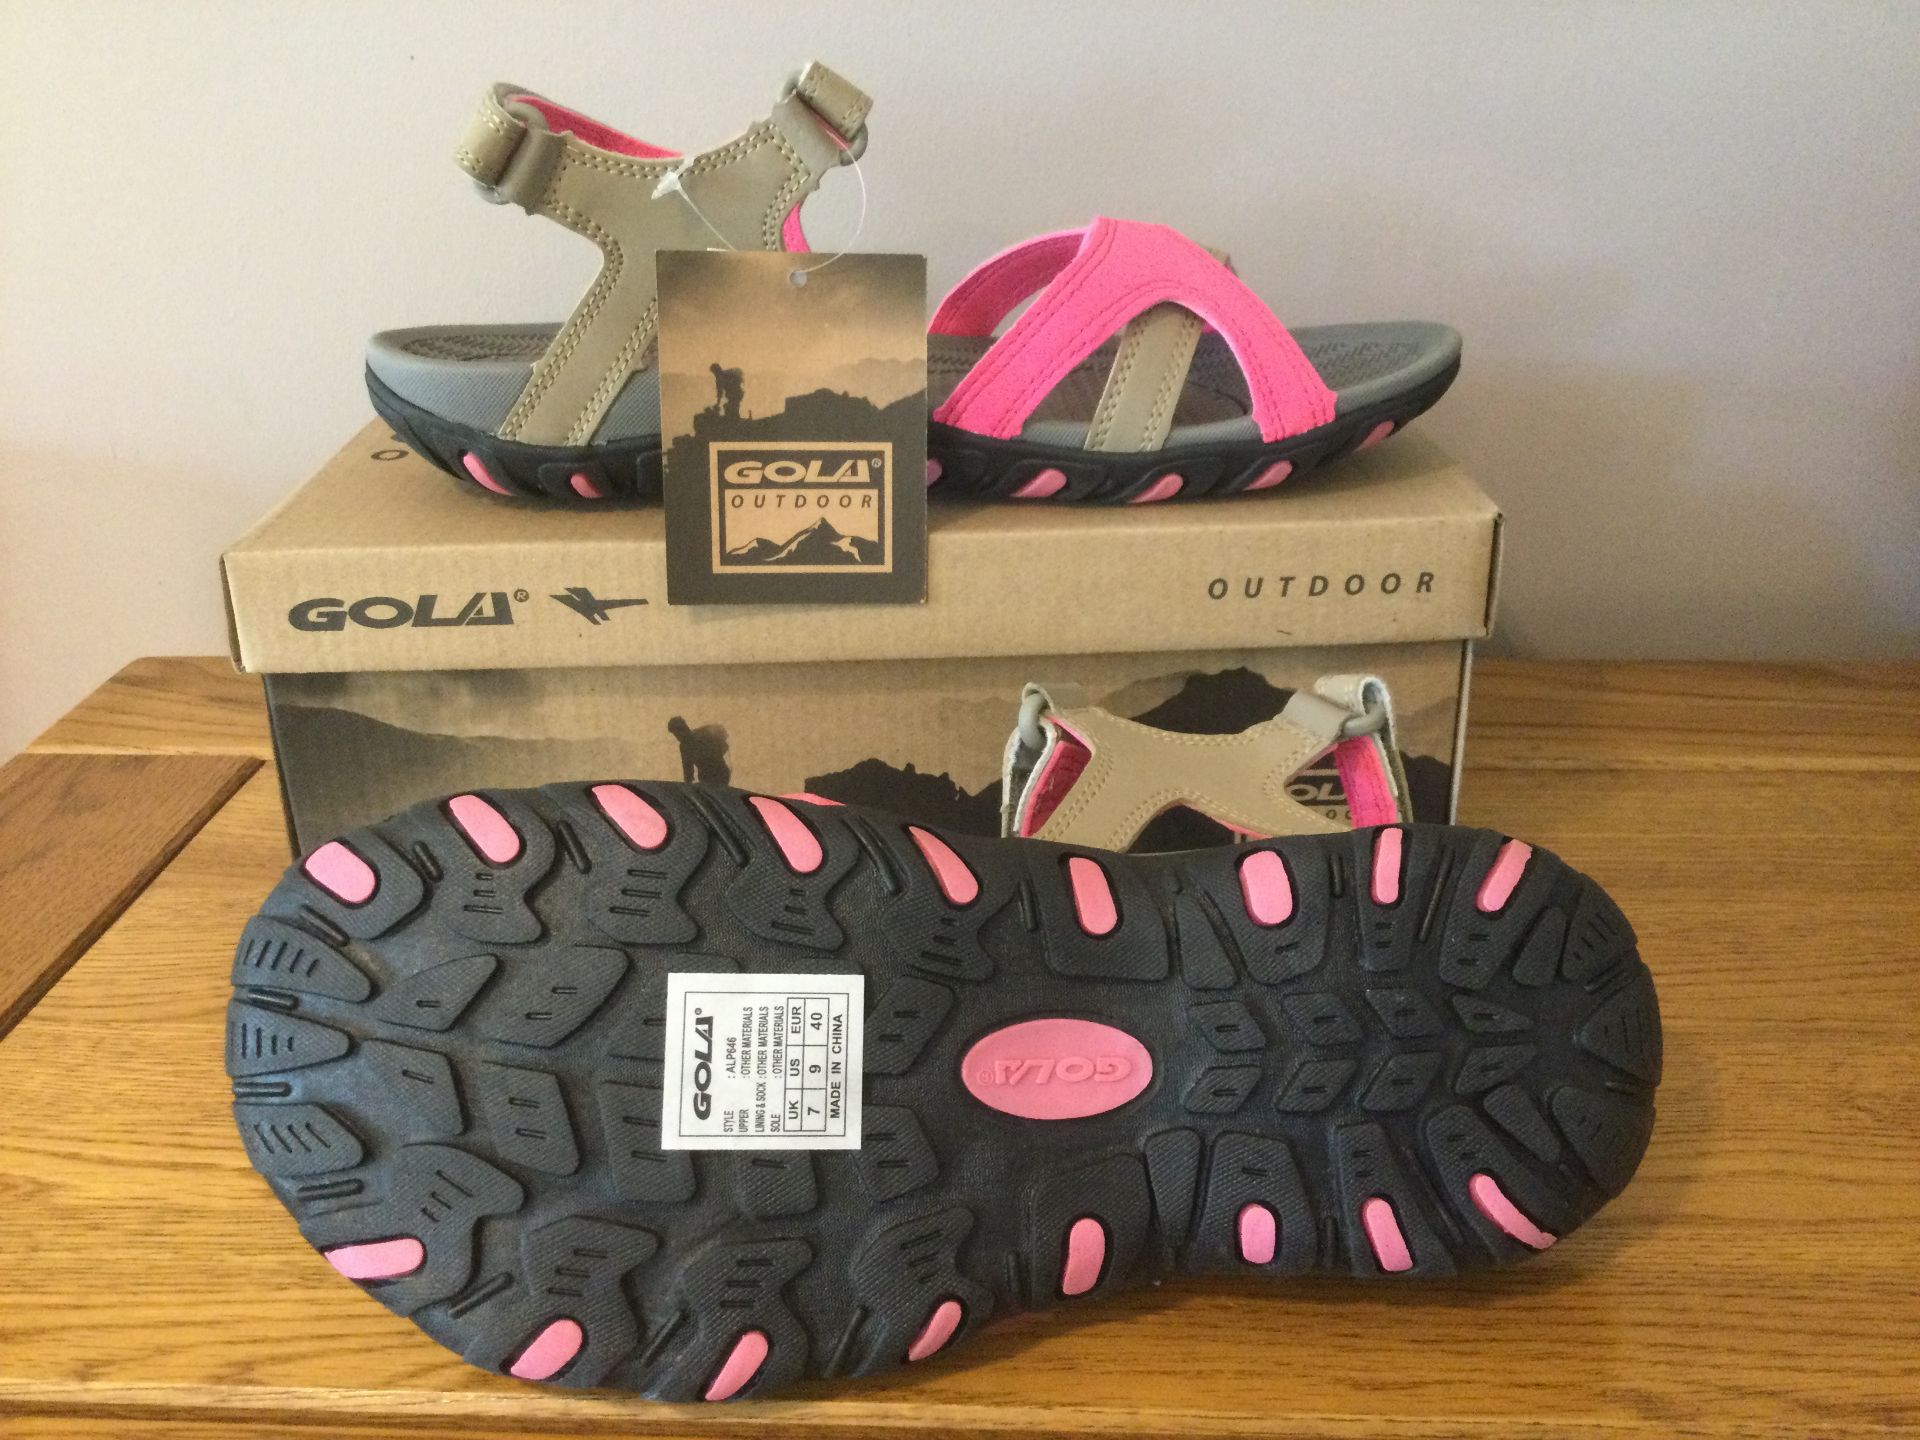 Gola Women's “Cedar” Hiking Sandals, Taupe/Hot Pink, Size 7 - Brand New - Image 3 of 4